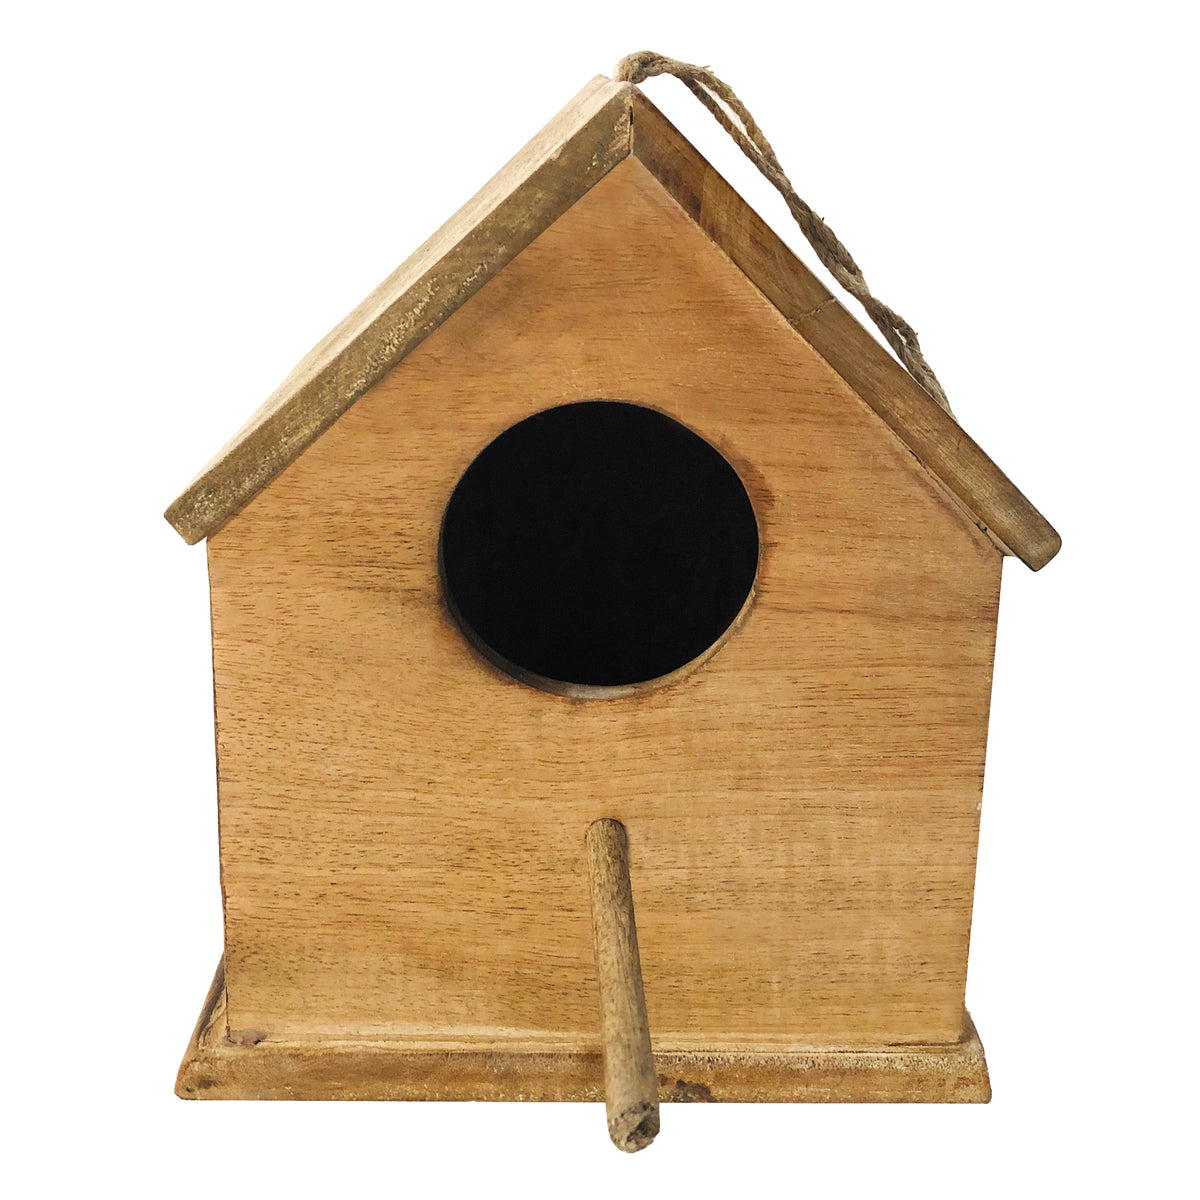 Hut Shape Decorative Mango Wood Hanging Bird House with Engraved Details, Distressed Brown - UPT-214885